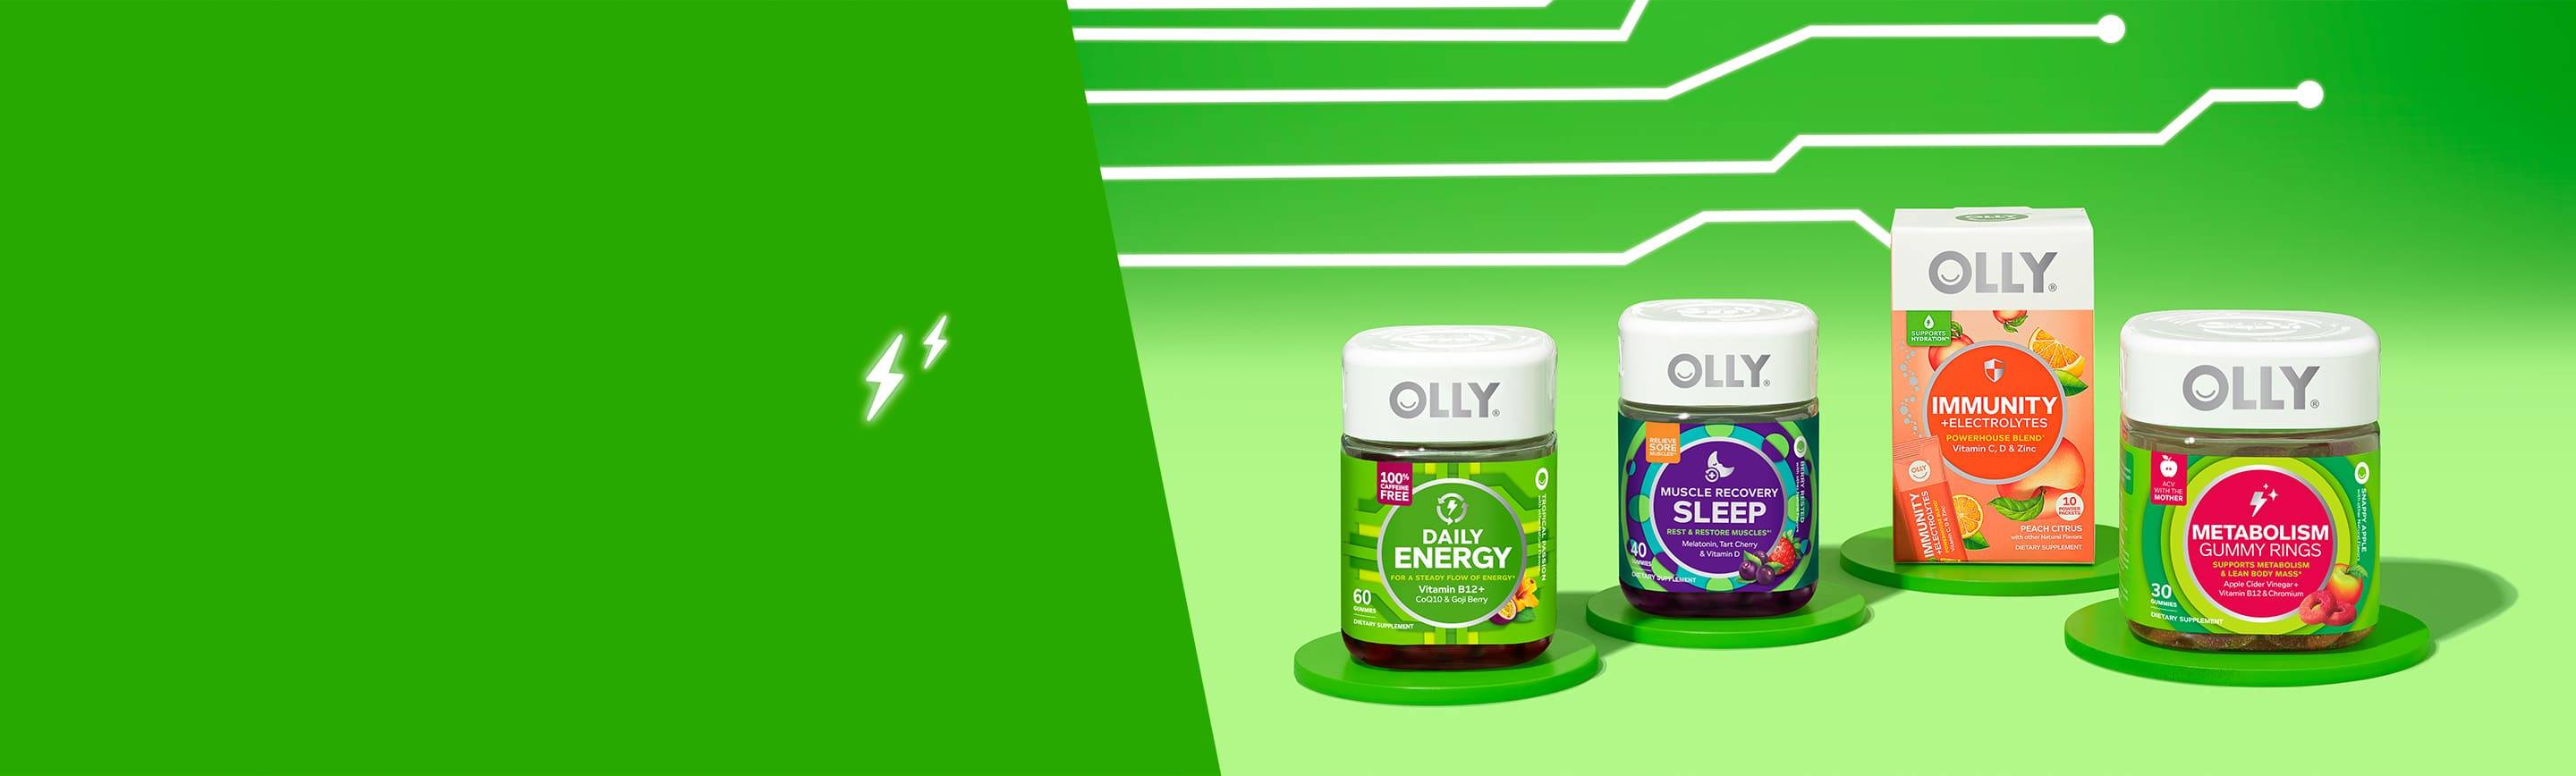 OLLY Energy Products